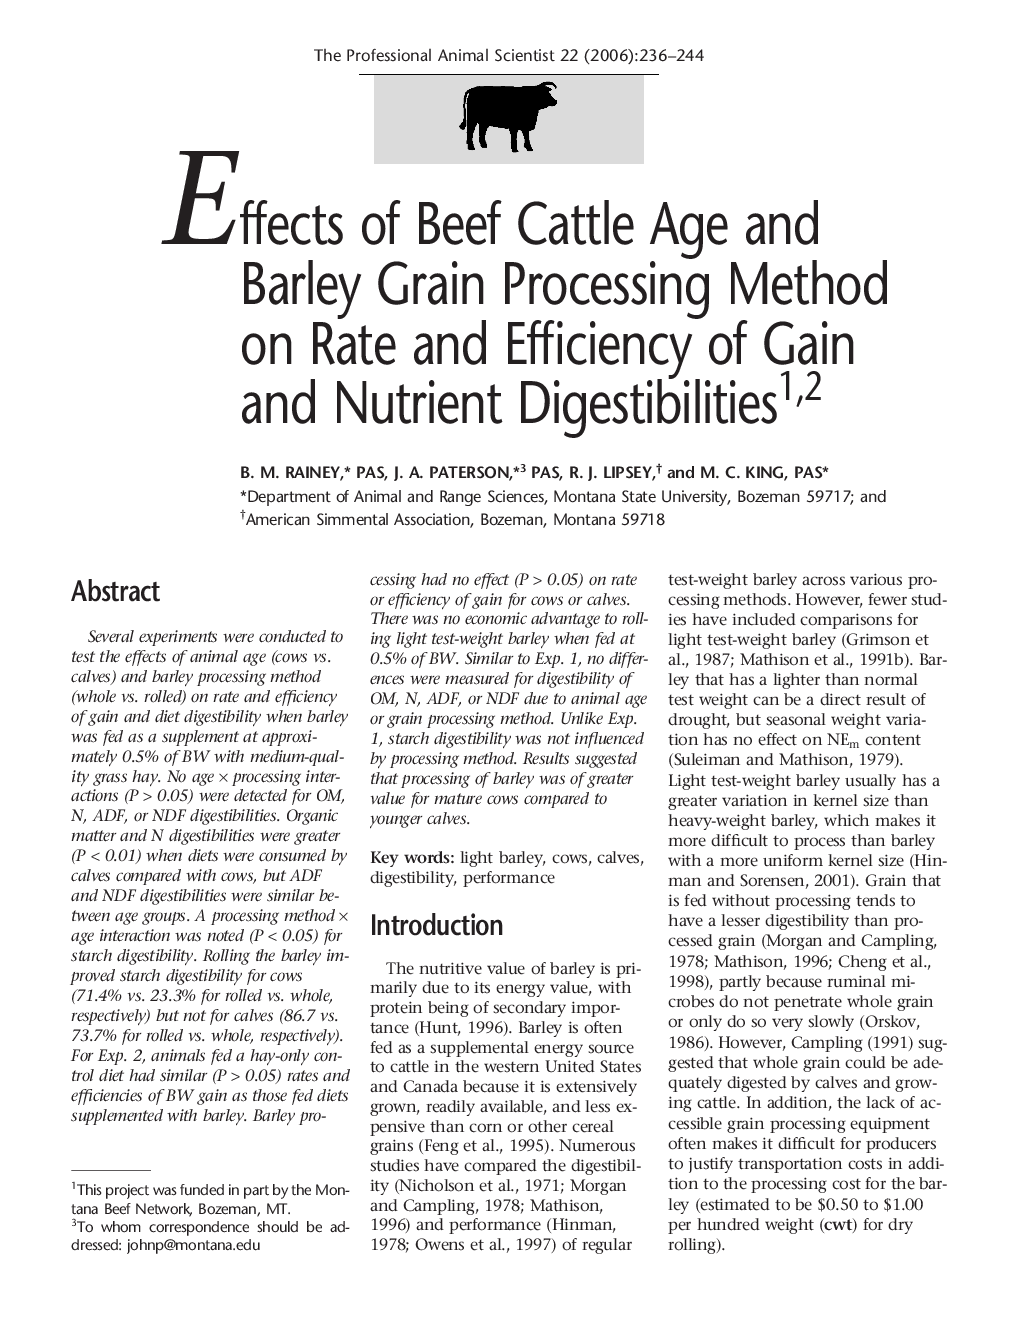 Effects of Beef Cattle Age and Barley Grain Processing Method on Rate and Efficiency of Gain and Nutrient Digestibilities1,2